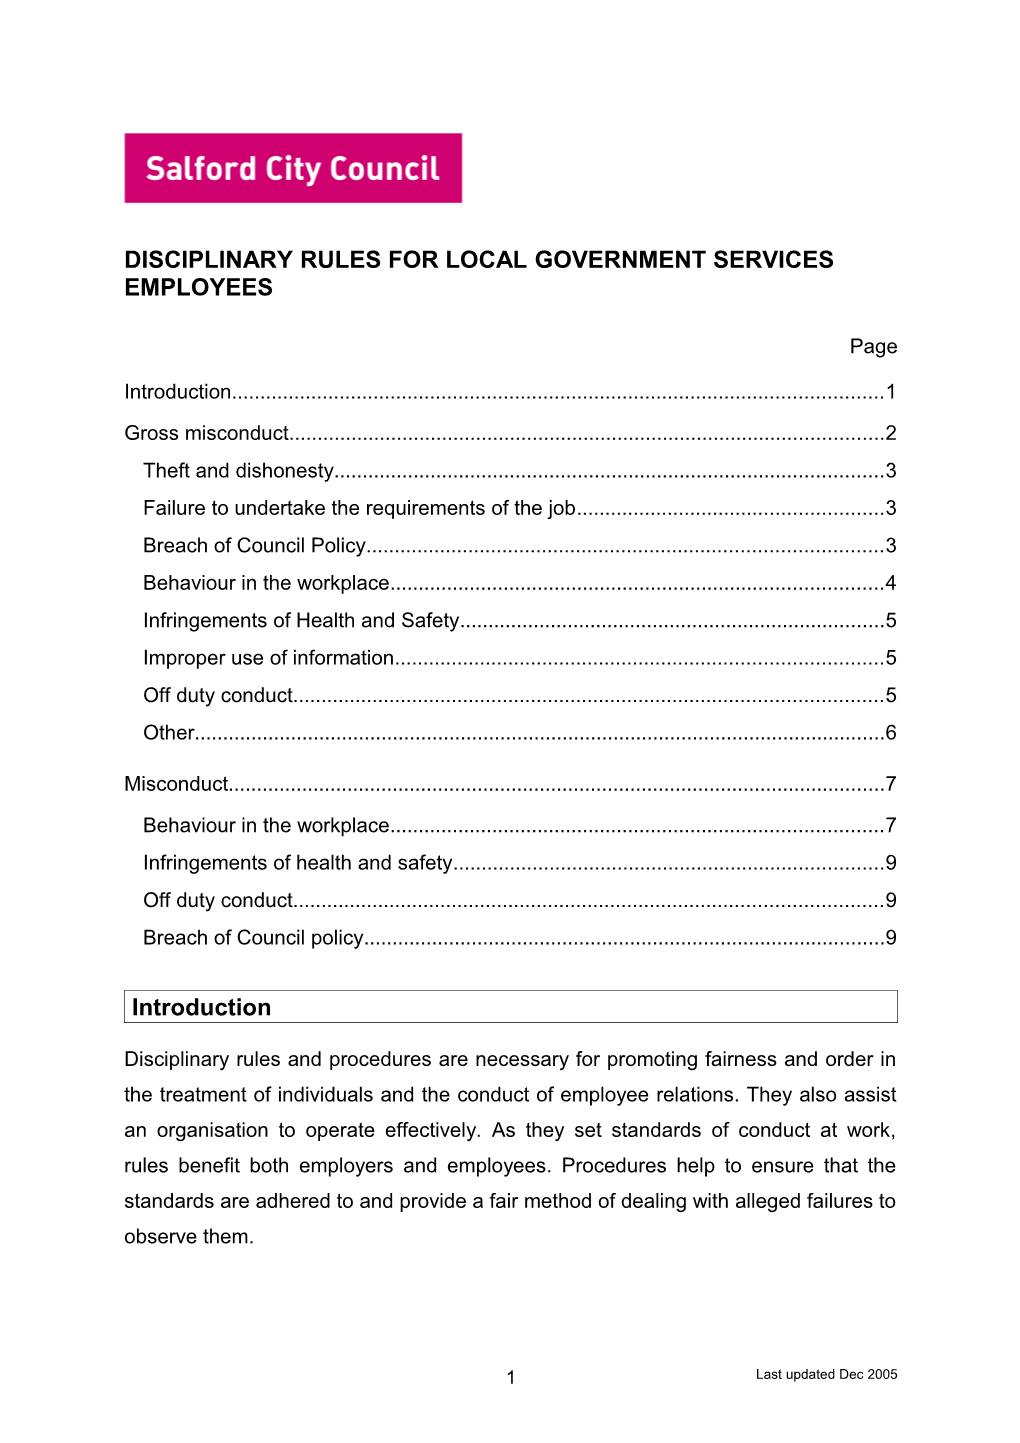 Disciplinary Rules for Local Government Services Employees